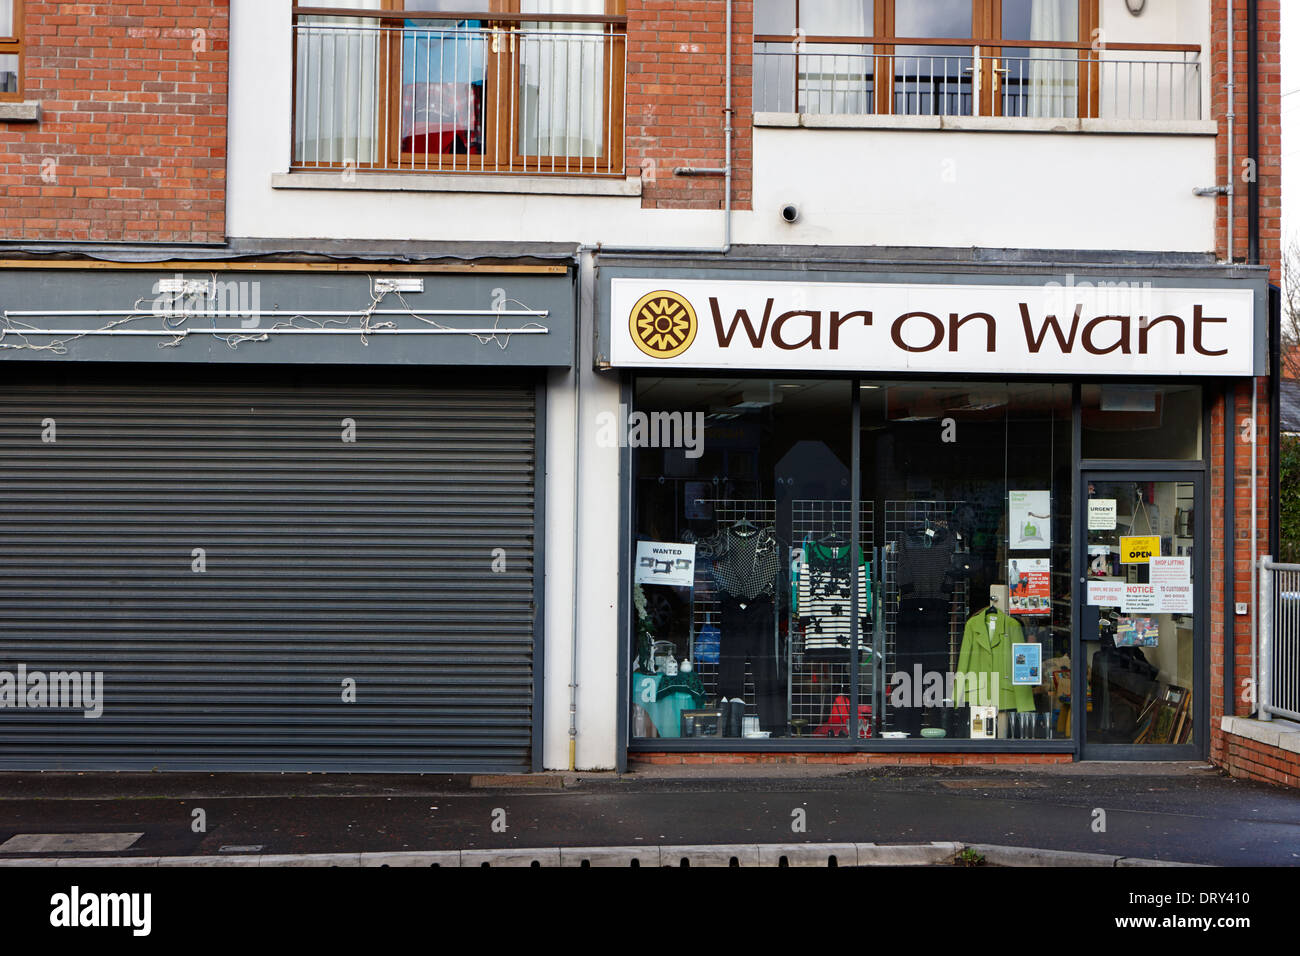 war on want charity shop next to closed shop on high street dunmurry belfast uk Stock Photo